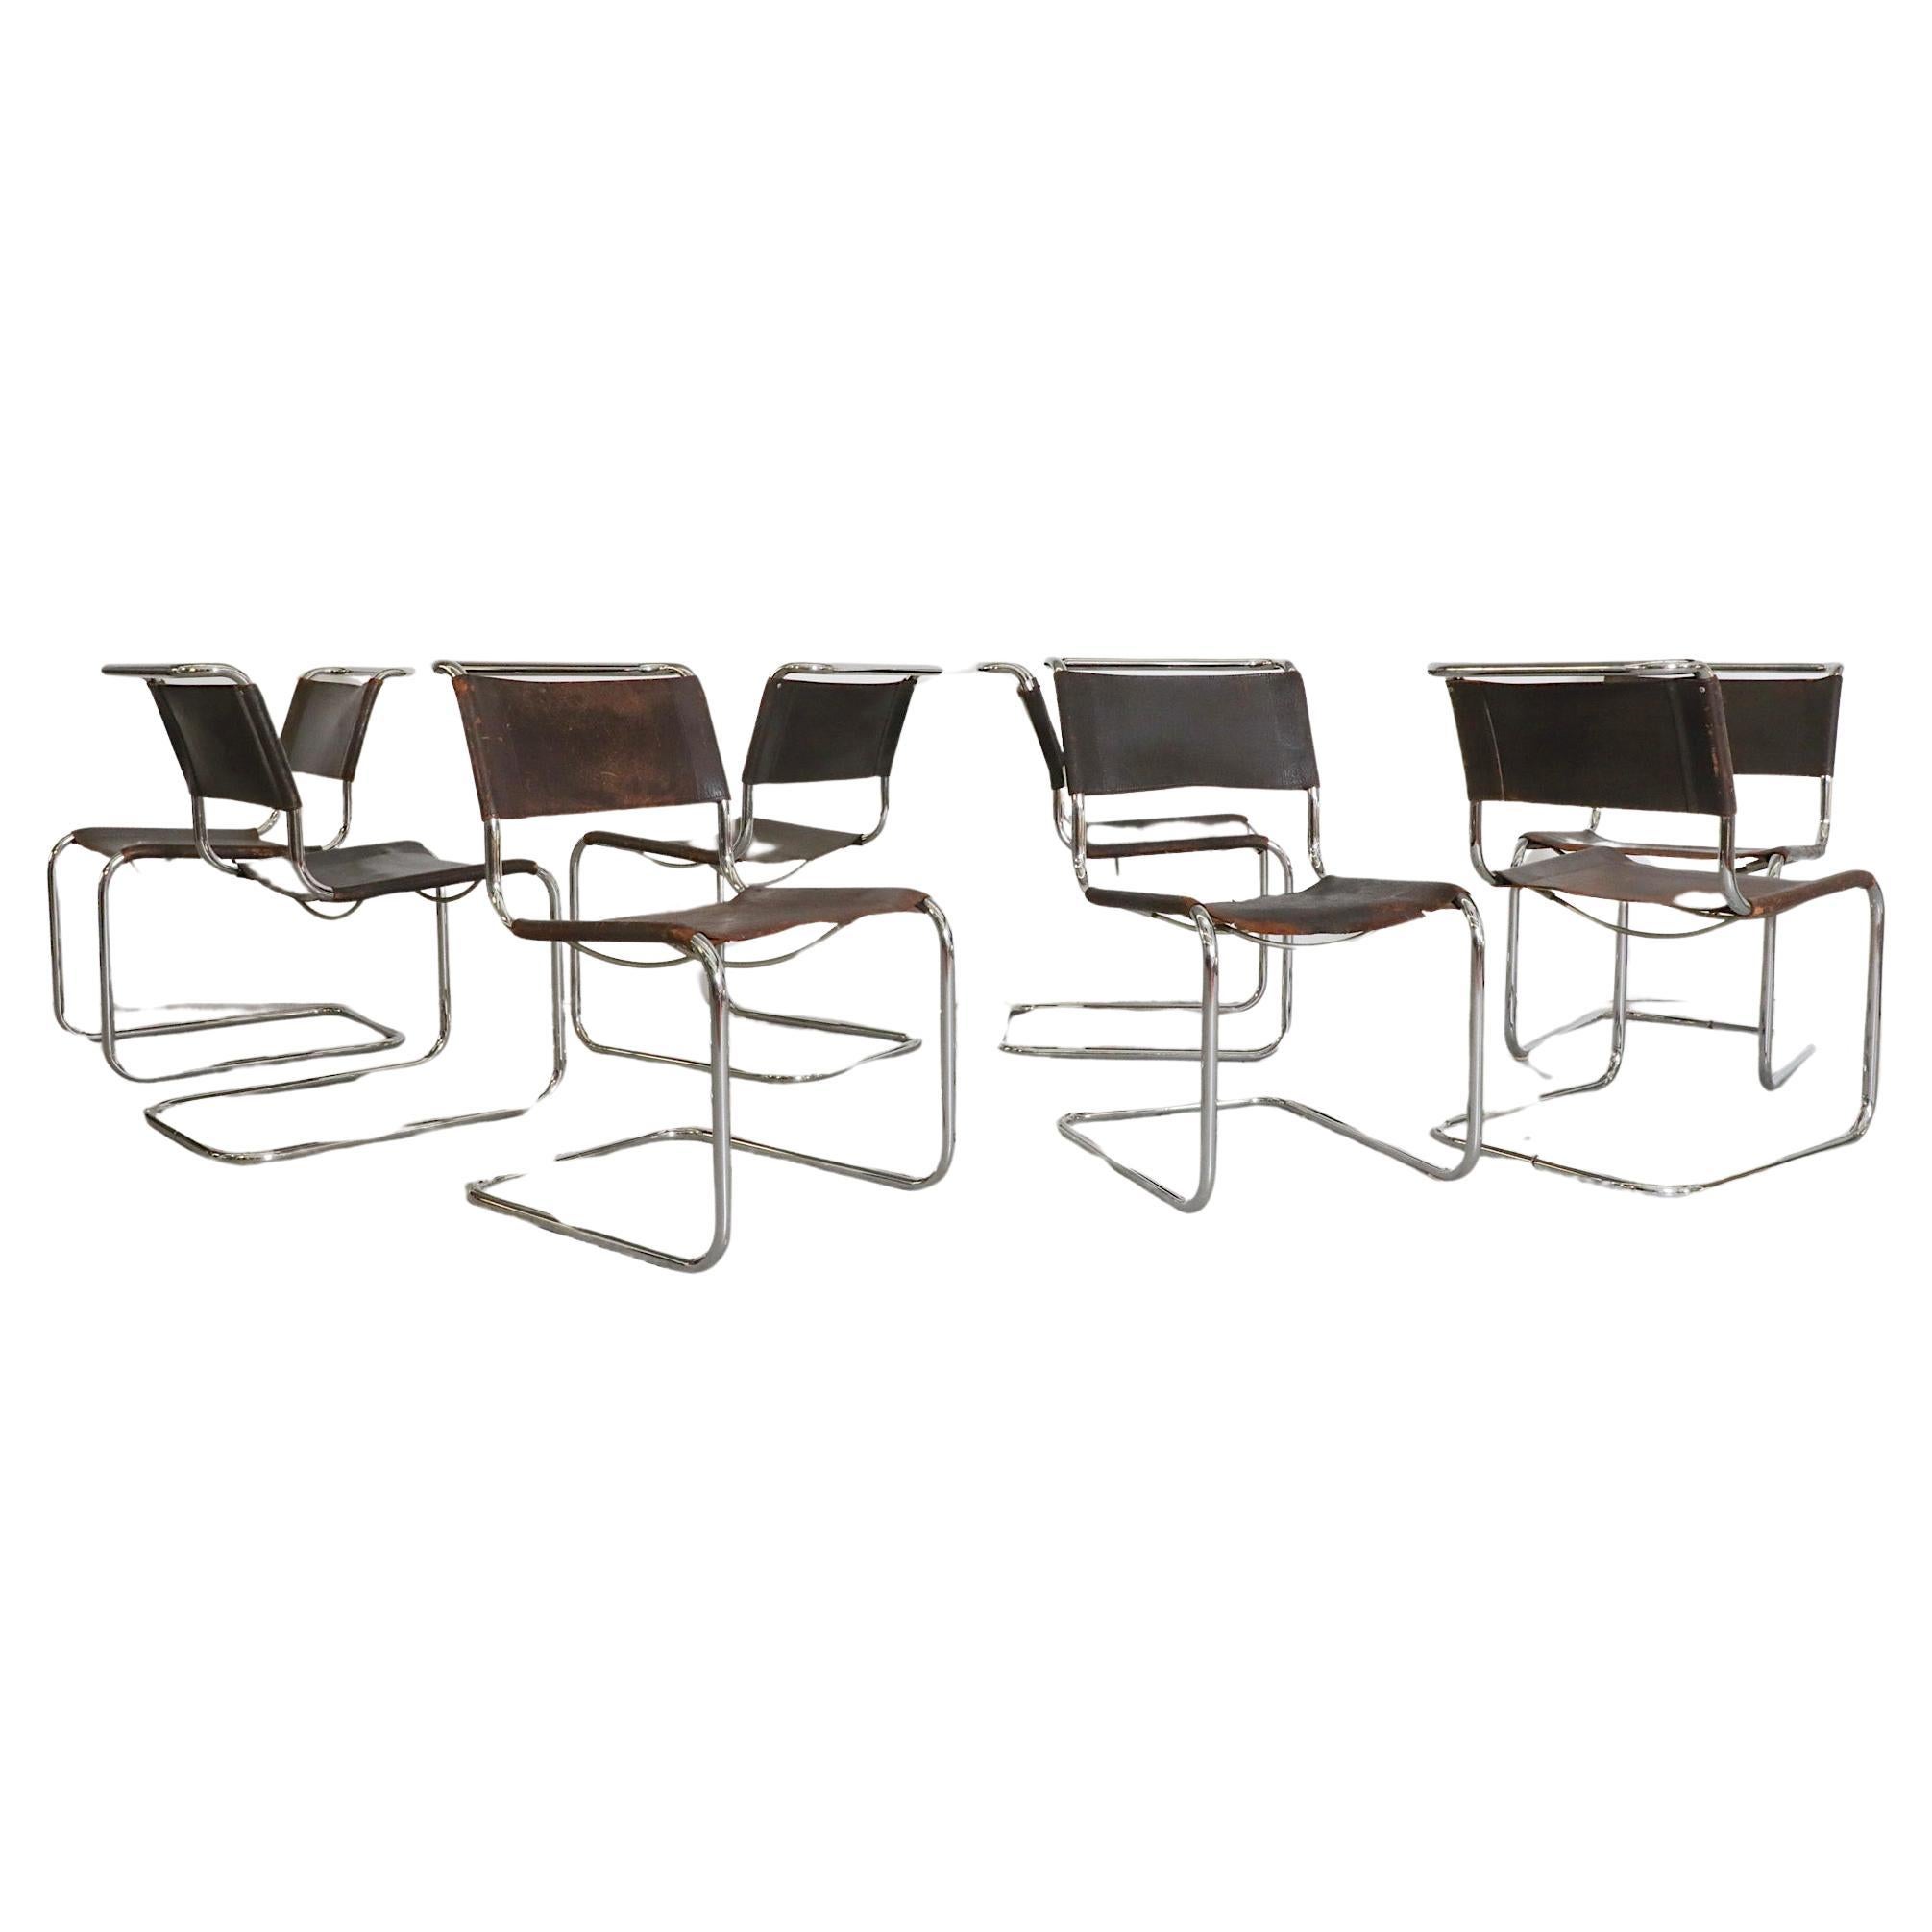 Set of 8 Thonet S33 Leather and Chrome Chairs by Mart Stam For Sale